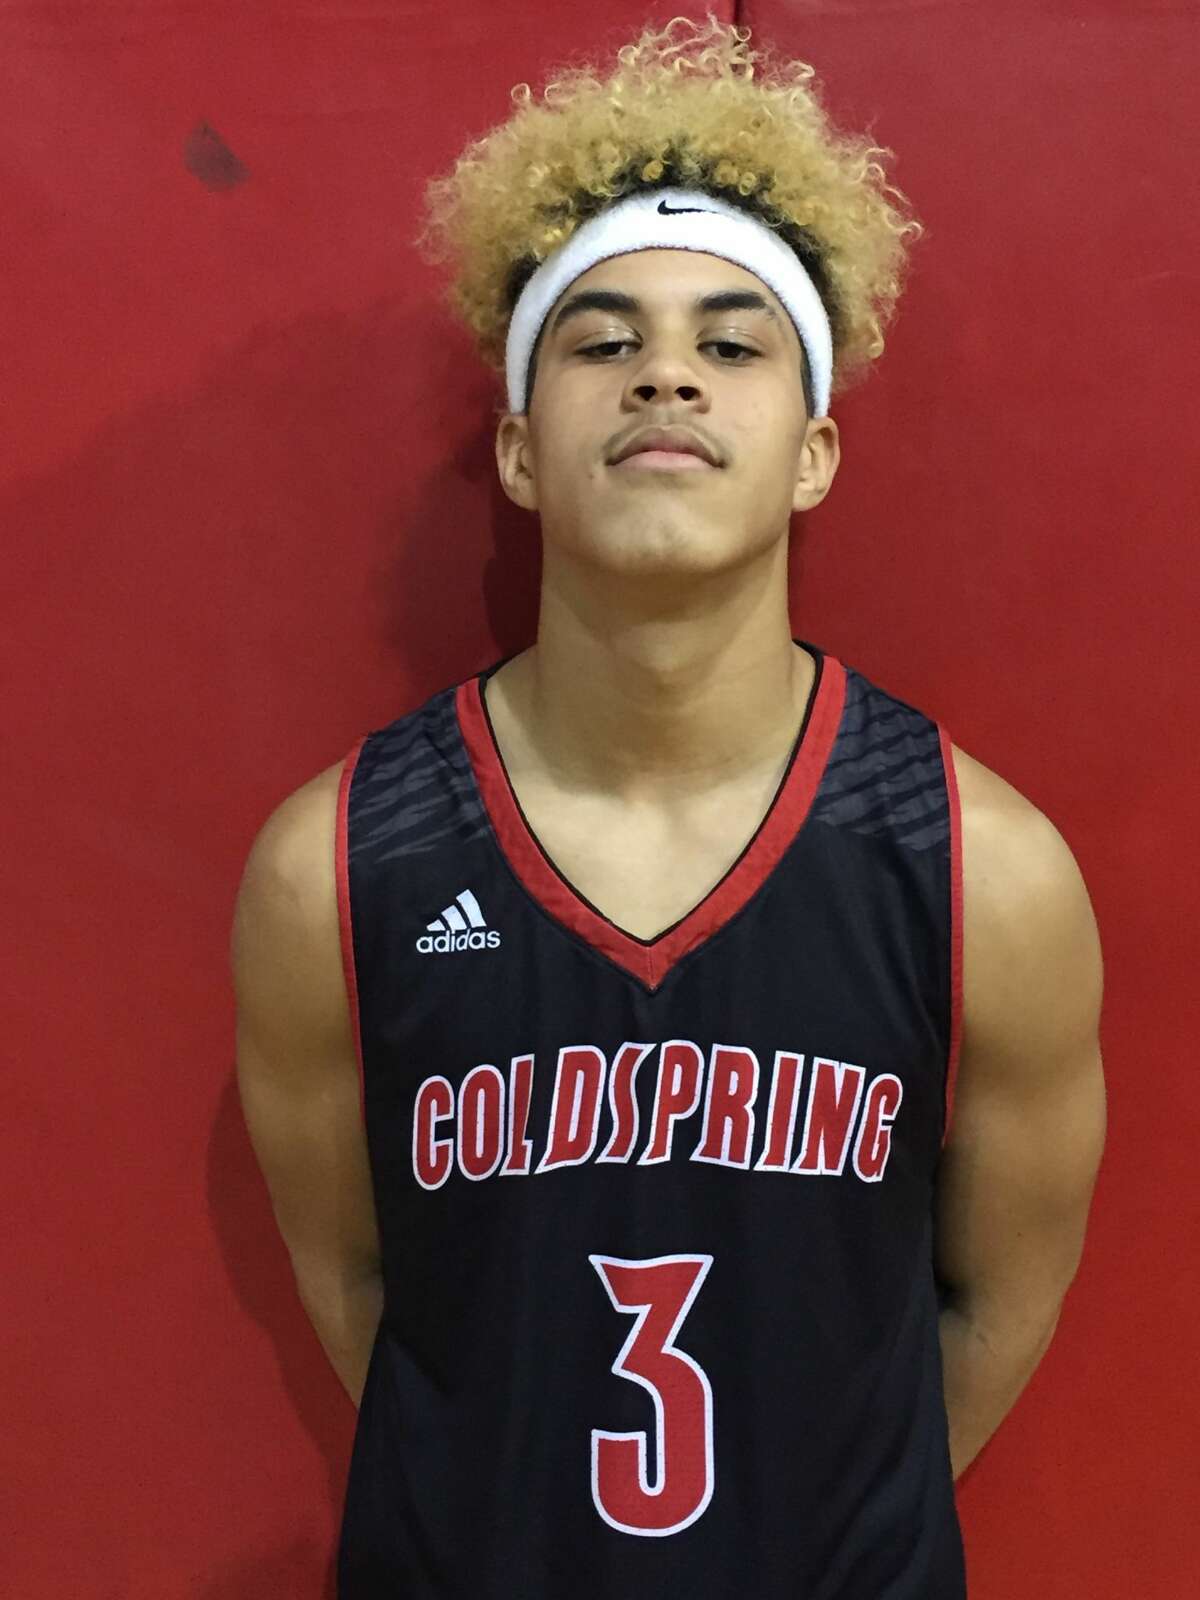 Coldspring's Jacoby Bishop is this week's Chron's boys player of the week.